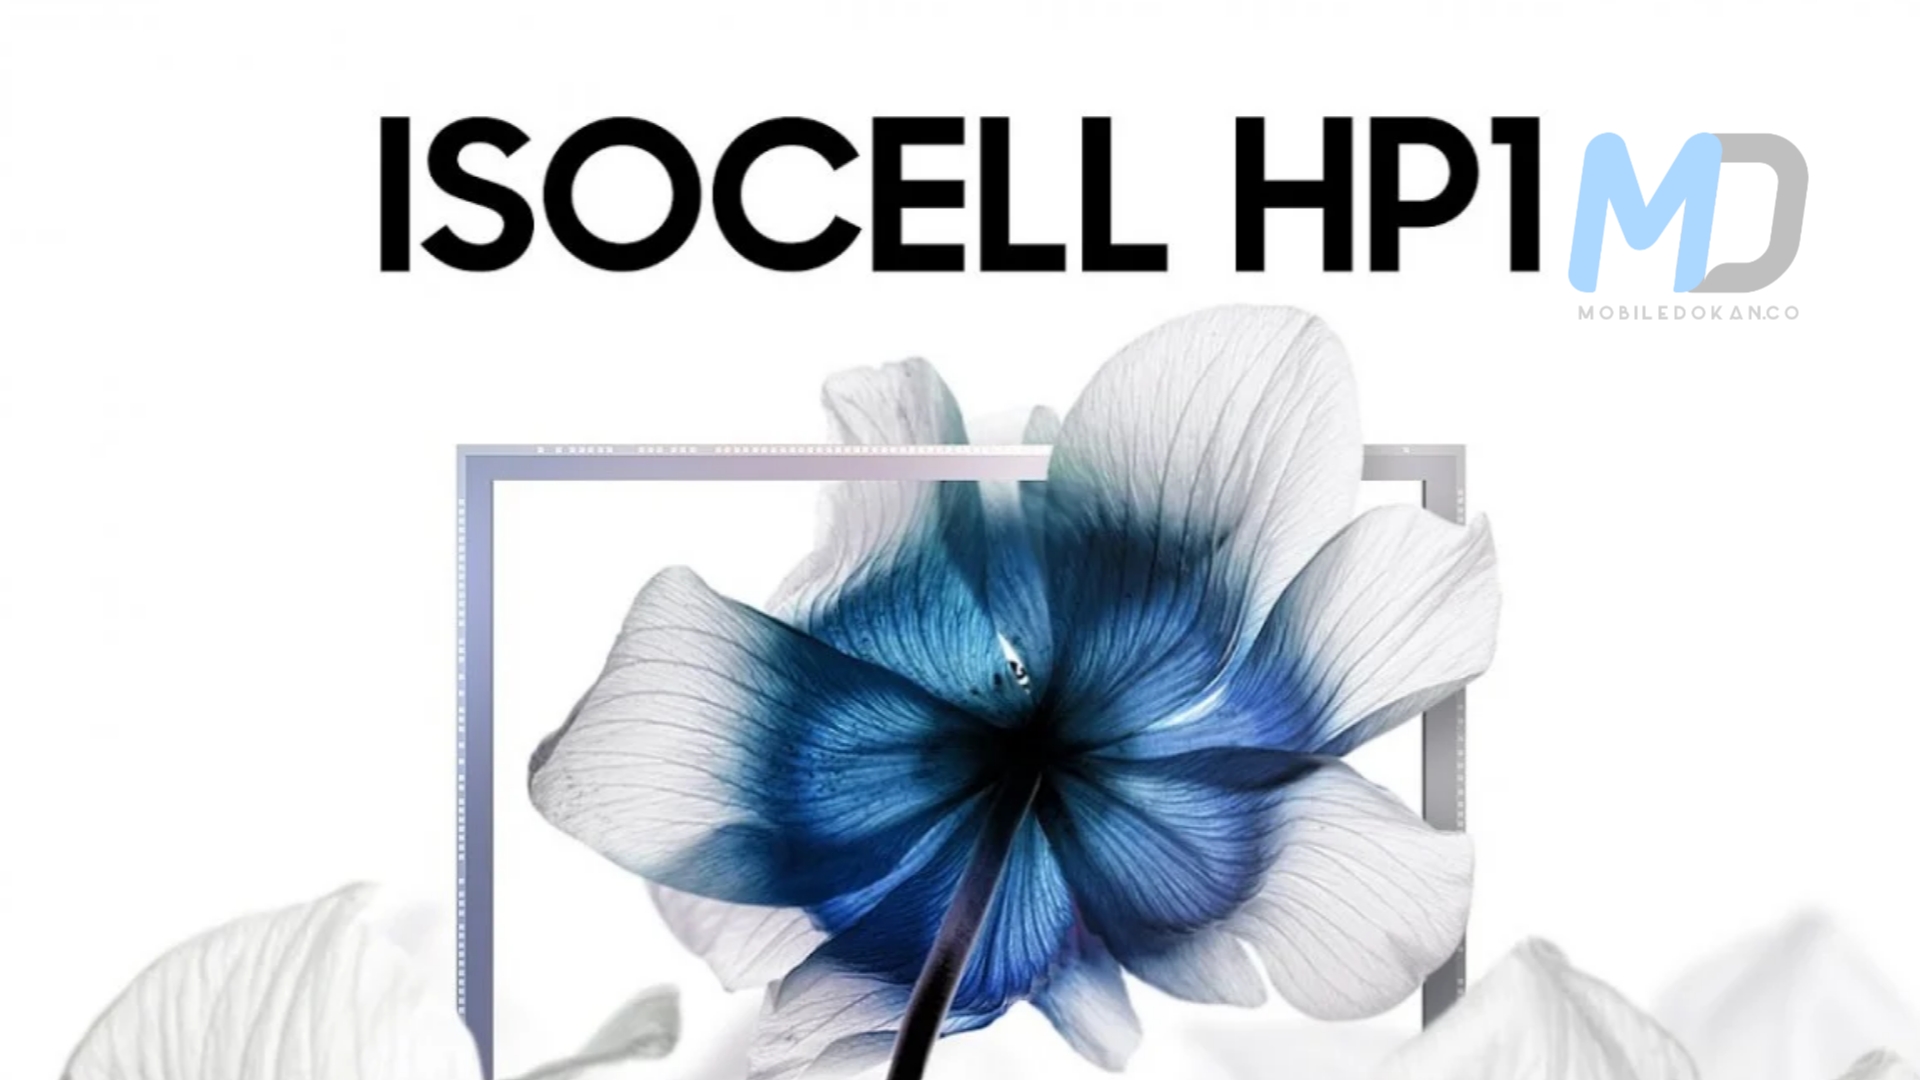 Samsung leaked the key features of its 200MP ISOCELL HP1 sensor